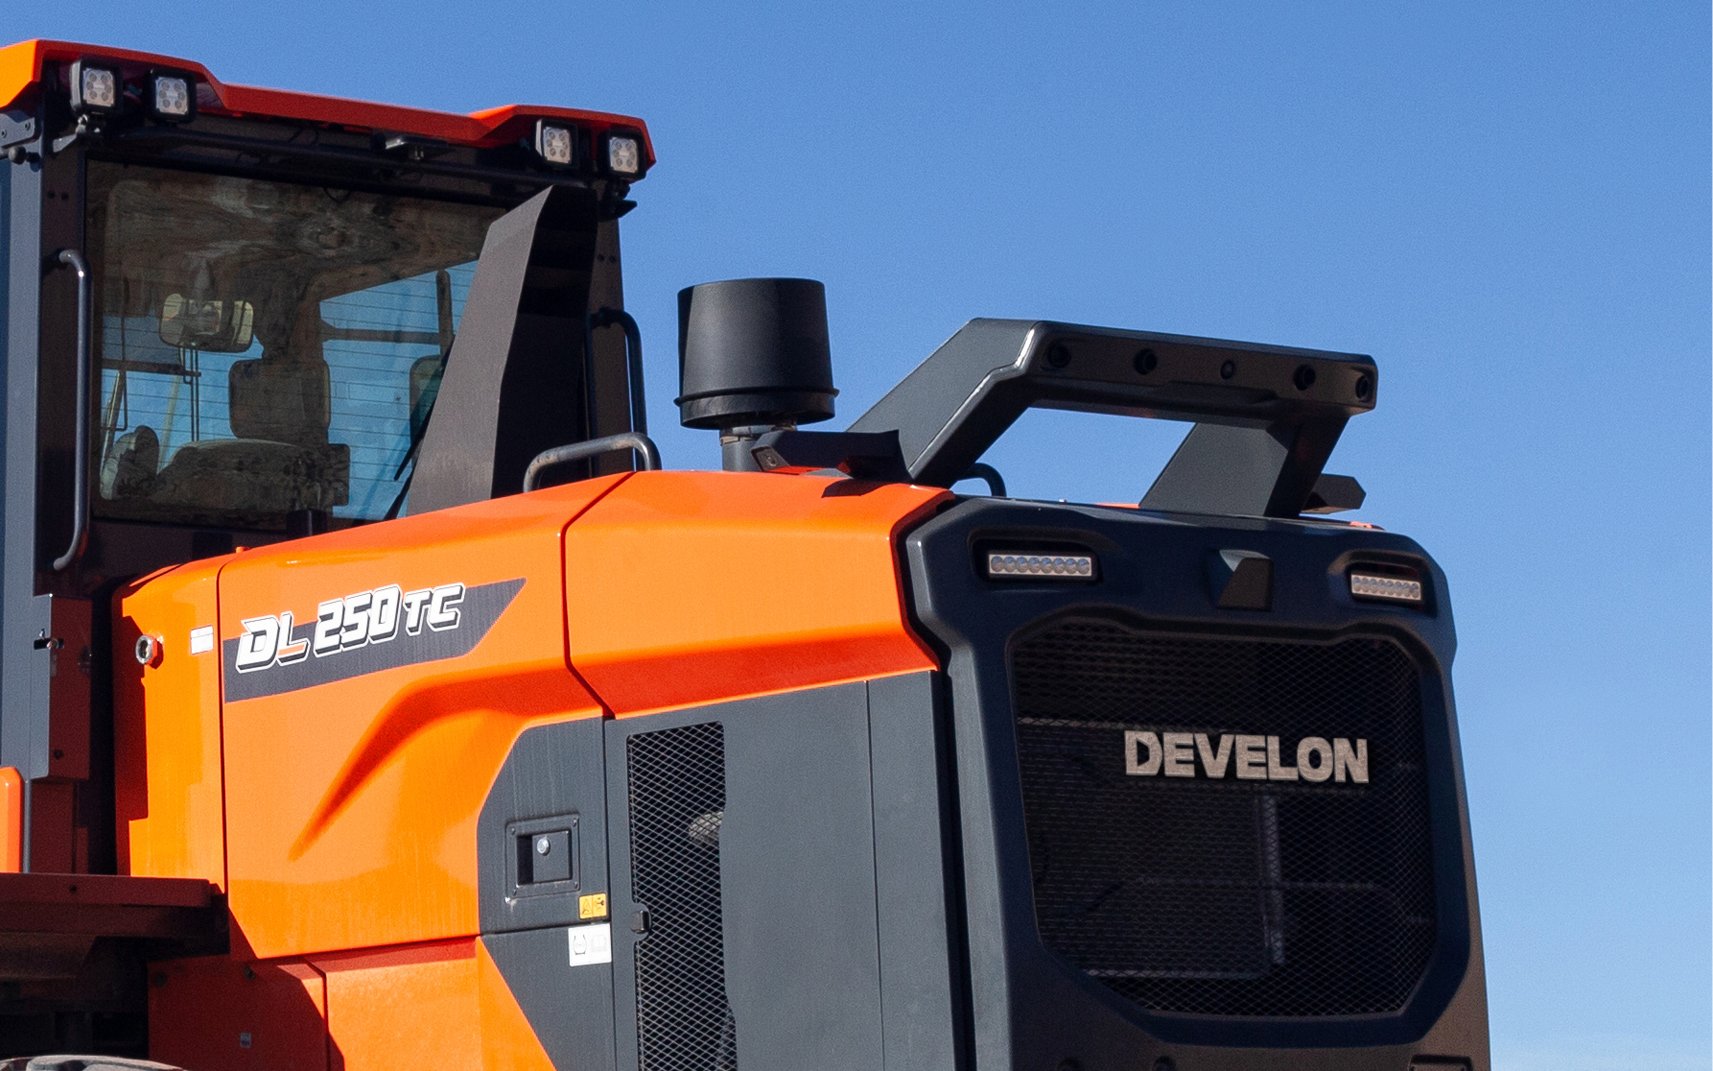 The around view monitor camera system is shown on a DL250TC-7 wheel loader.